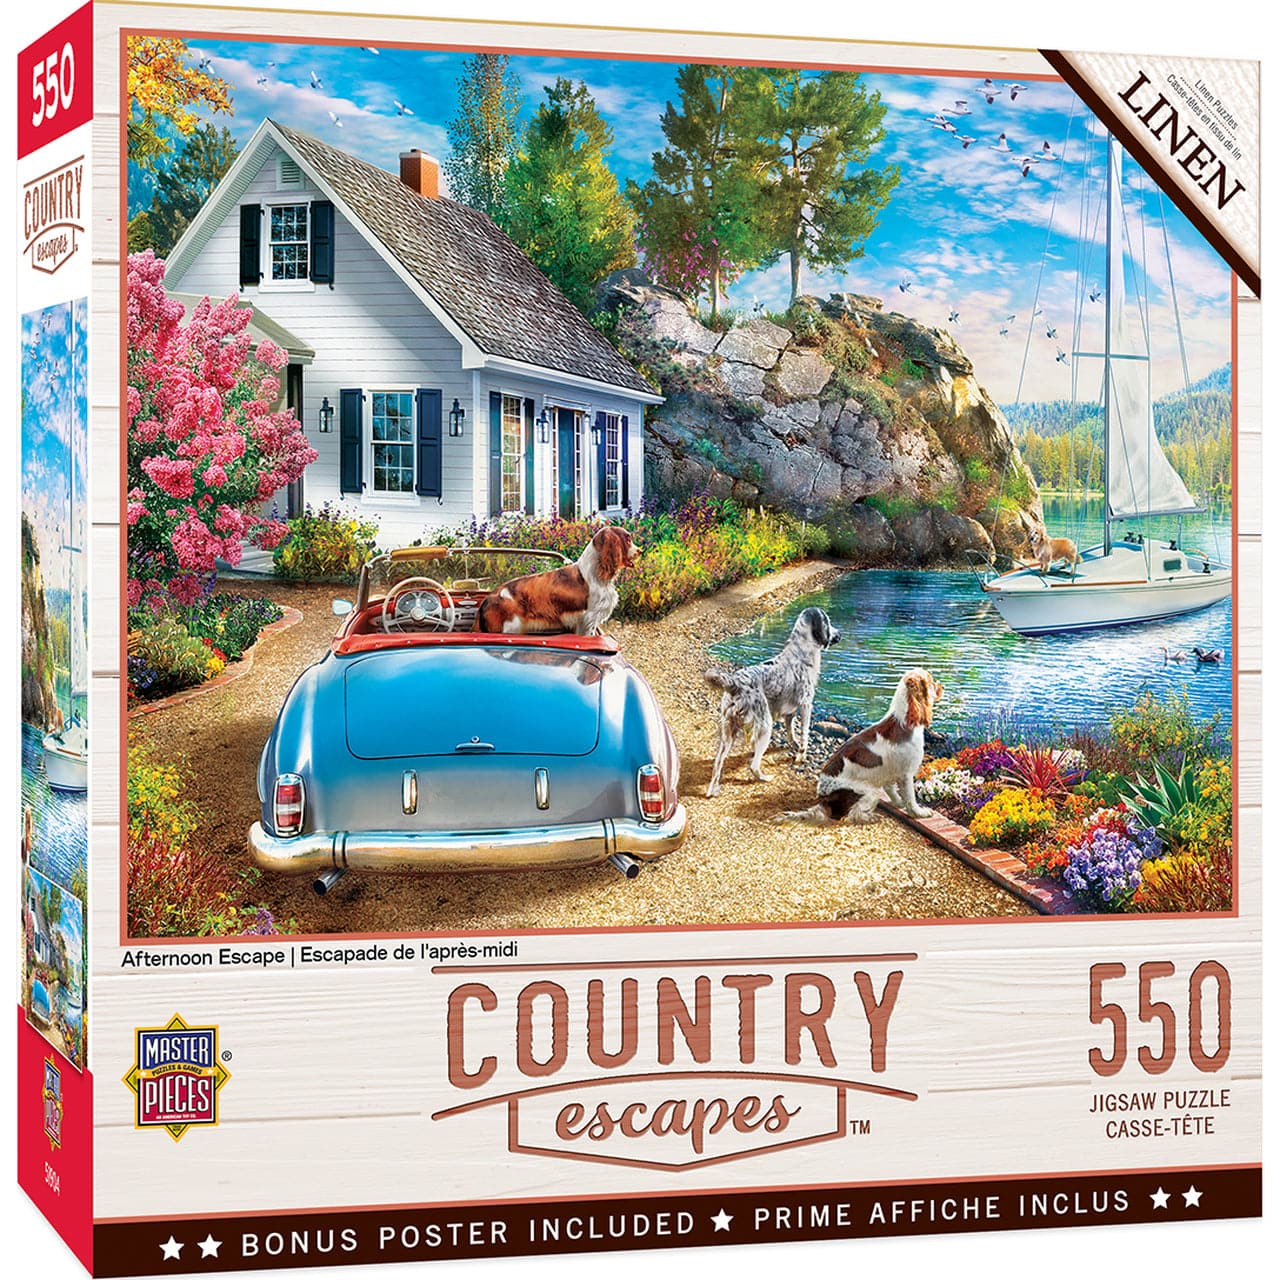 MasterPieces-Country Escapes - Afternoon Escape - 550 Piece Puzzle-32129-Legacy Toys